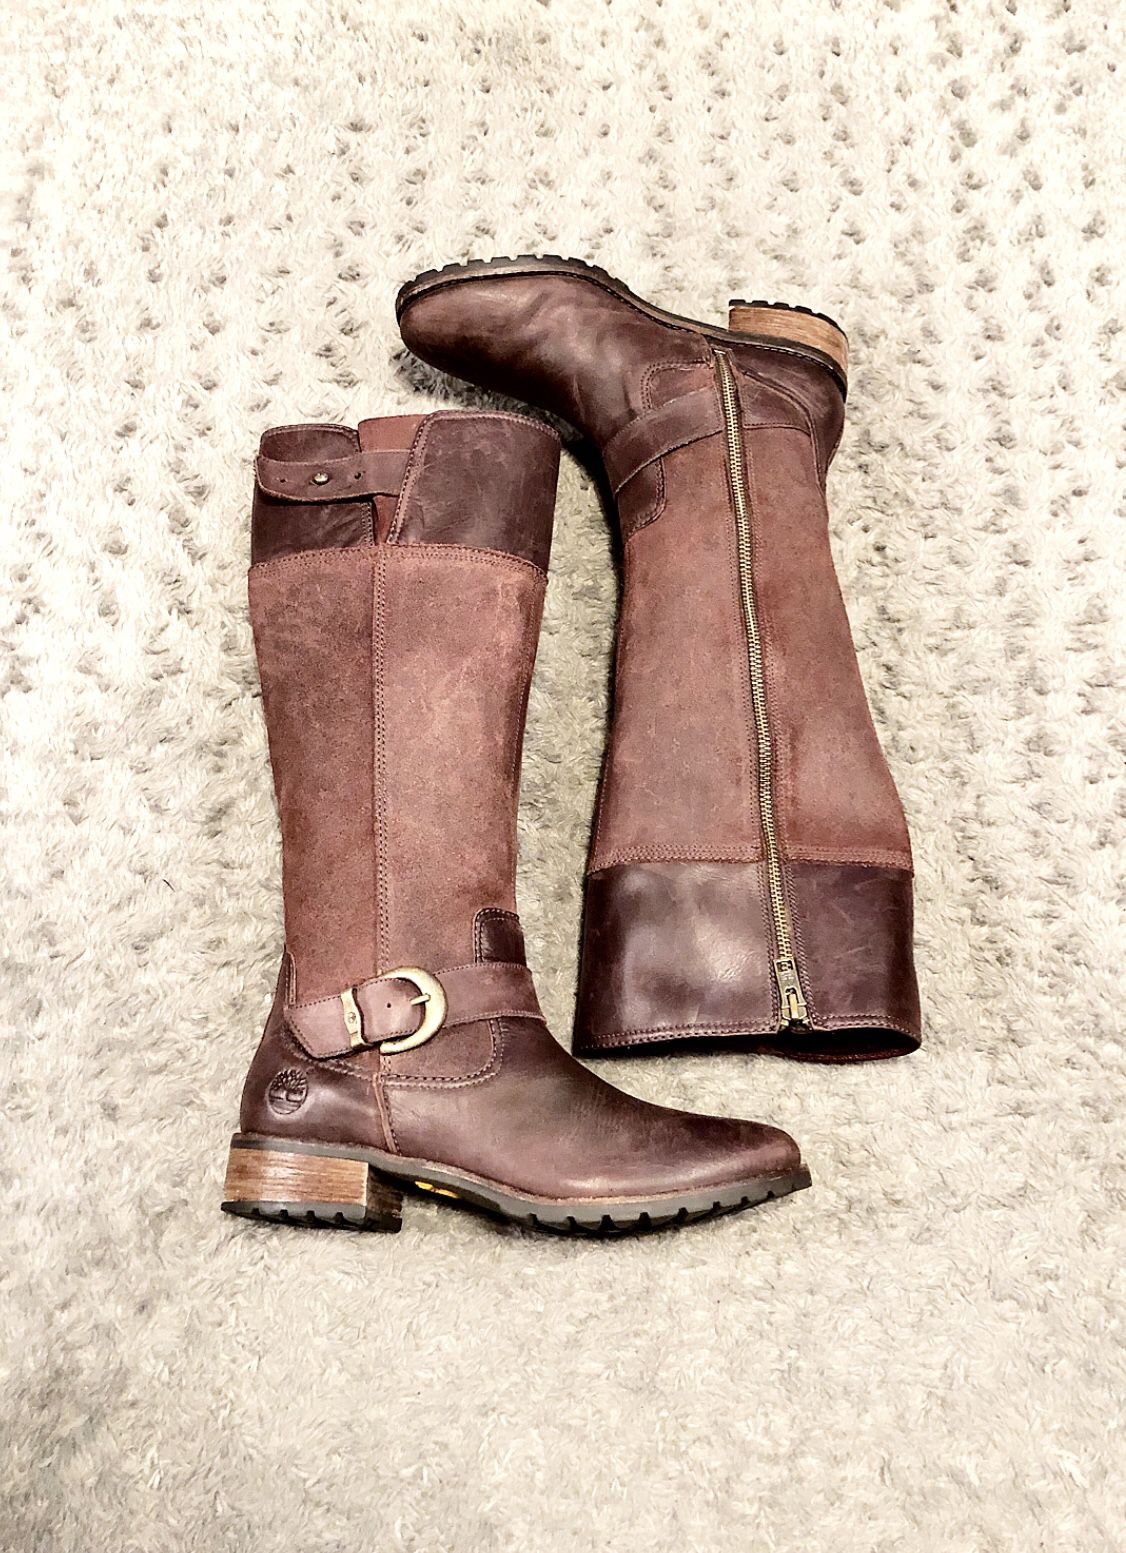 Timberland Bethel Buckle boots paid $225 size 8 Great condition! Color Burgundy/Red Leather. Adjustable buckle just under knee. 100% Leather, Rubber